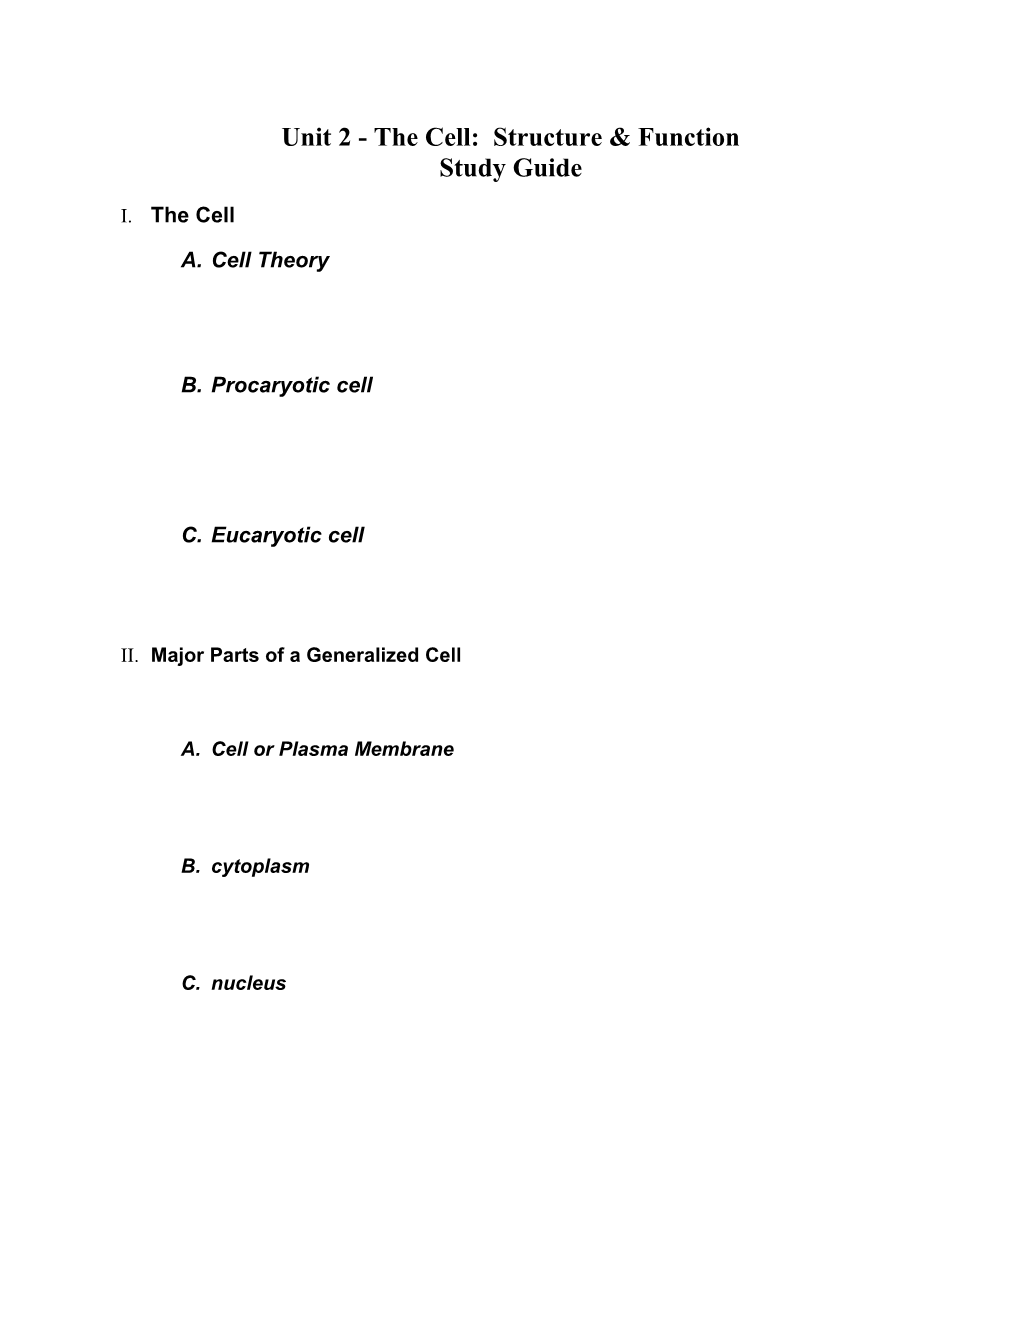 Unit 2 - The Cell: Structure & Function